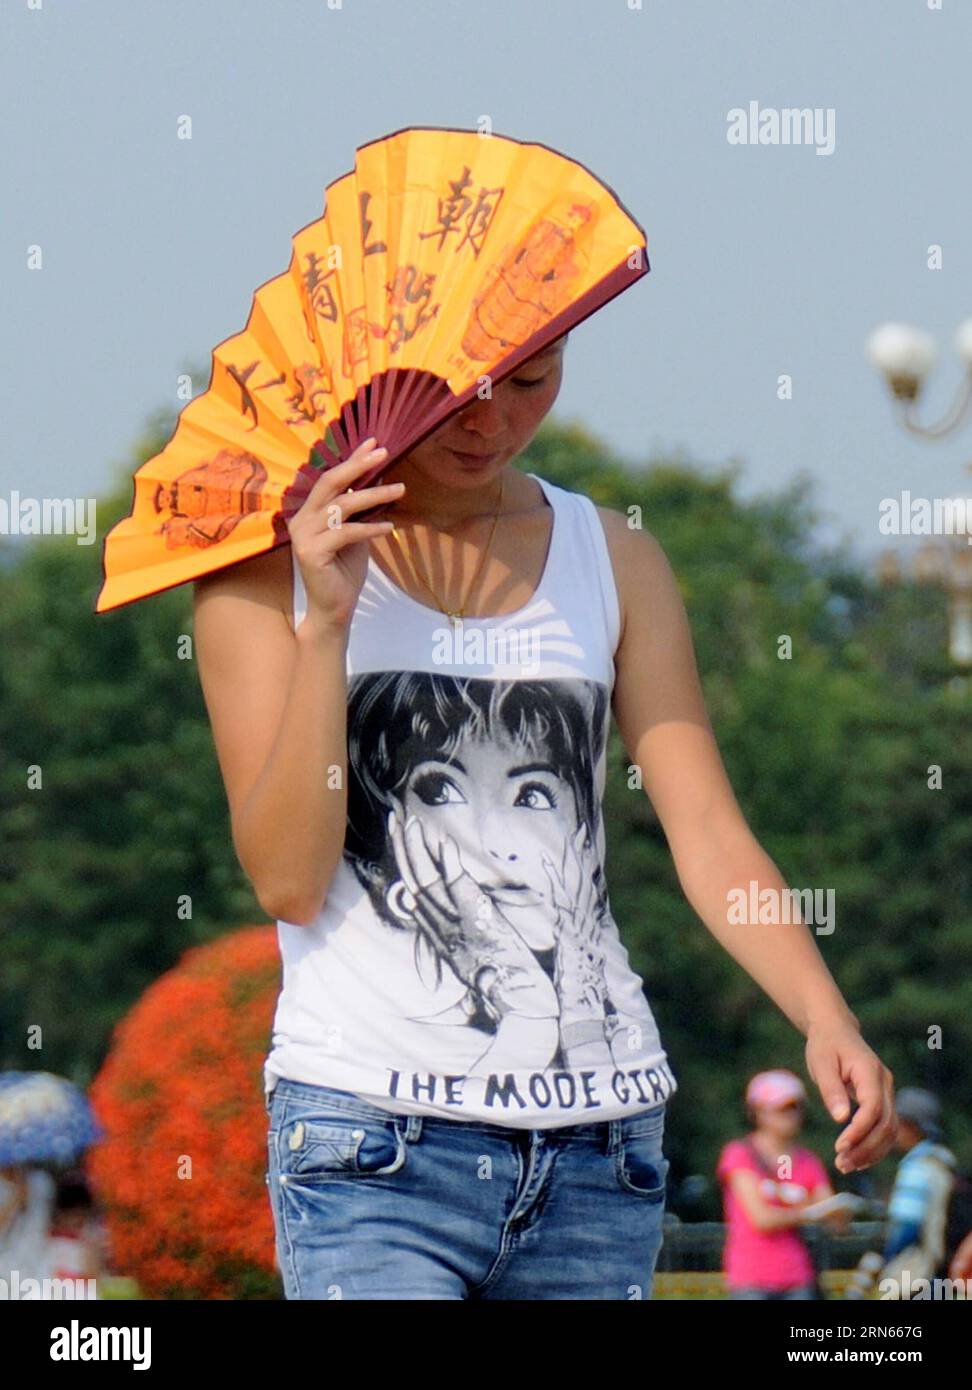 A woman uses a fan to protect herself from the sun in Beijing, capital of China, July 12, 2015. Beijing issued this summer s first heat alert on Sunday as the maximum temperature in the Chinese capital soared above 40 degrees celsius. () (zwx) CHINA-BEIJING-HIGH TEMPERATURE(CN) Xinhua PUBLICATIONxNOTxINxCHN   a Woman Uses a supporter to Protect herself from The Sun in Beijing Capital of China July 12 2015 Beijing issued This Summer S First Heat Alert ON Sunday As The Maximum temperature in The Chinese Capital soared above 40 Degrees Celsius zwx China Beijing High temperature CN XINHUA PUBLICAT Stock Photo